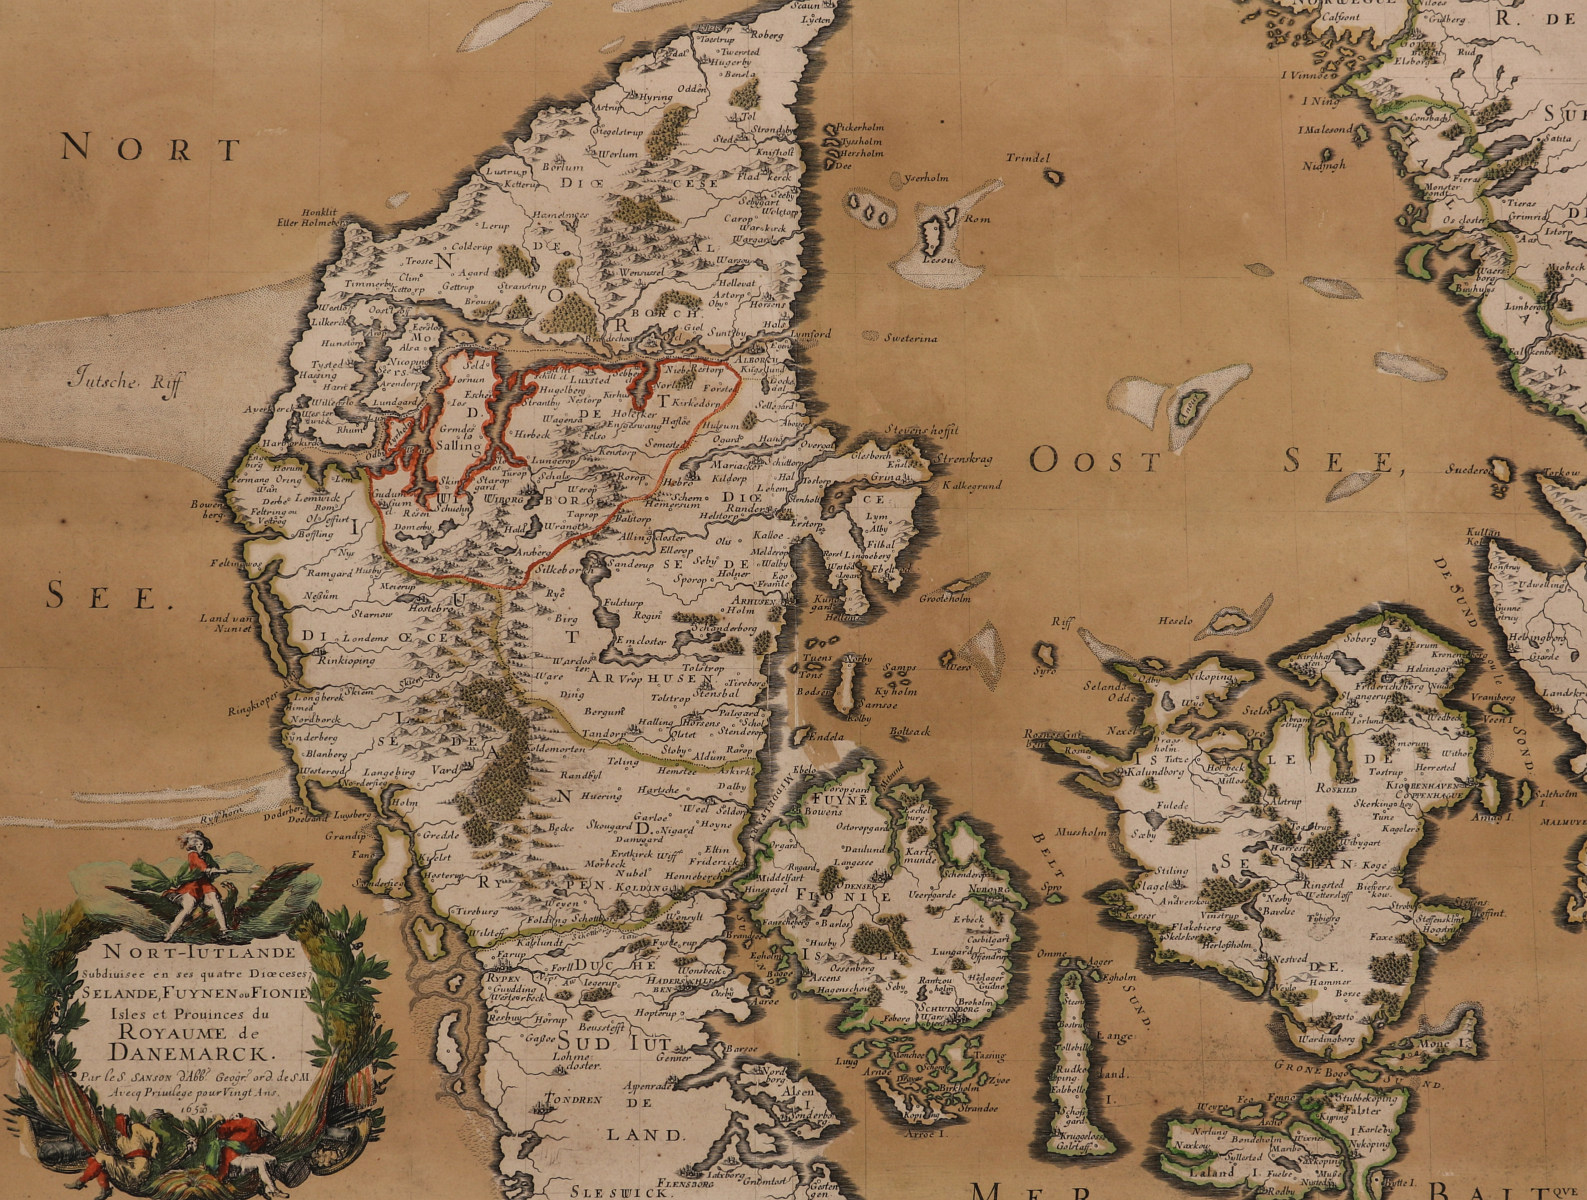 AN 1659 FRENCH MAP OF DENMARK BY NICOLAS SANSON